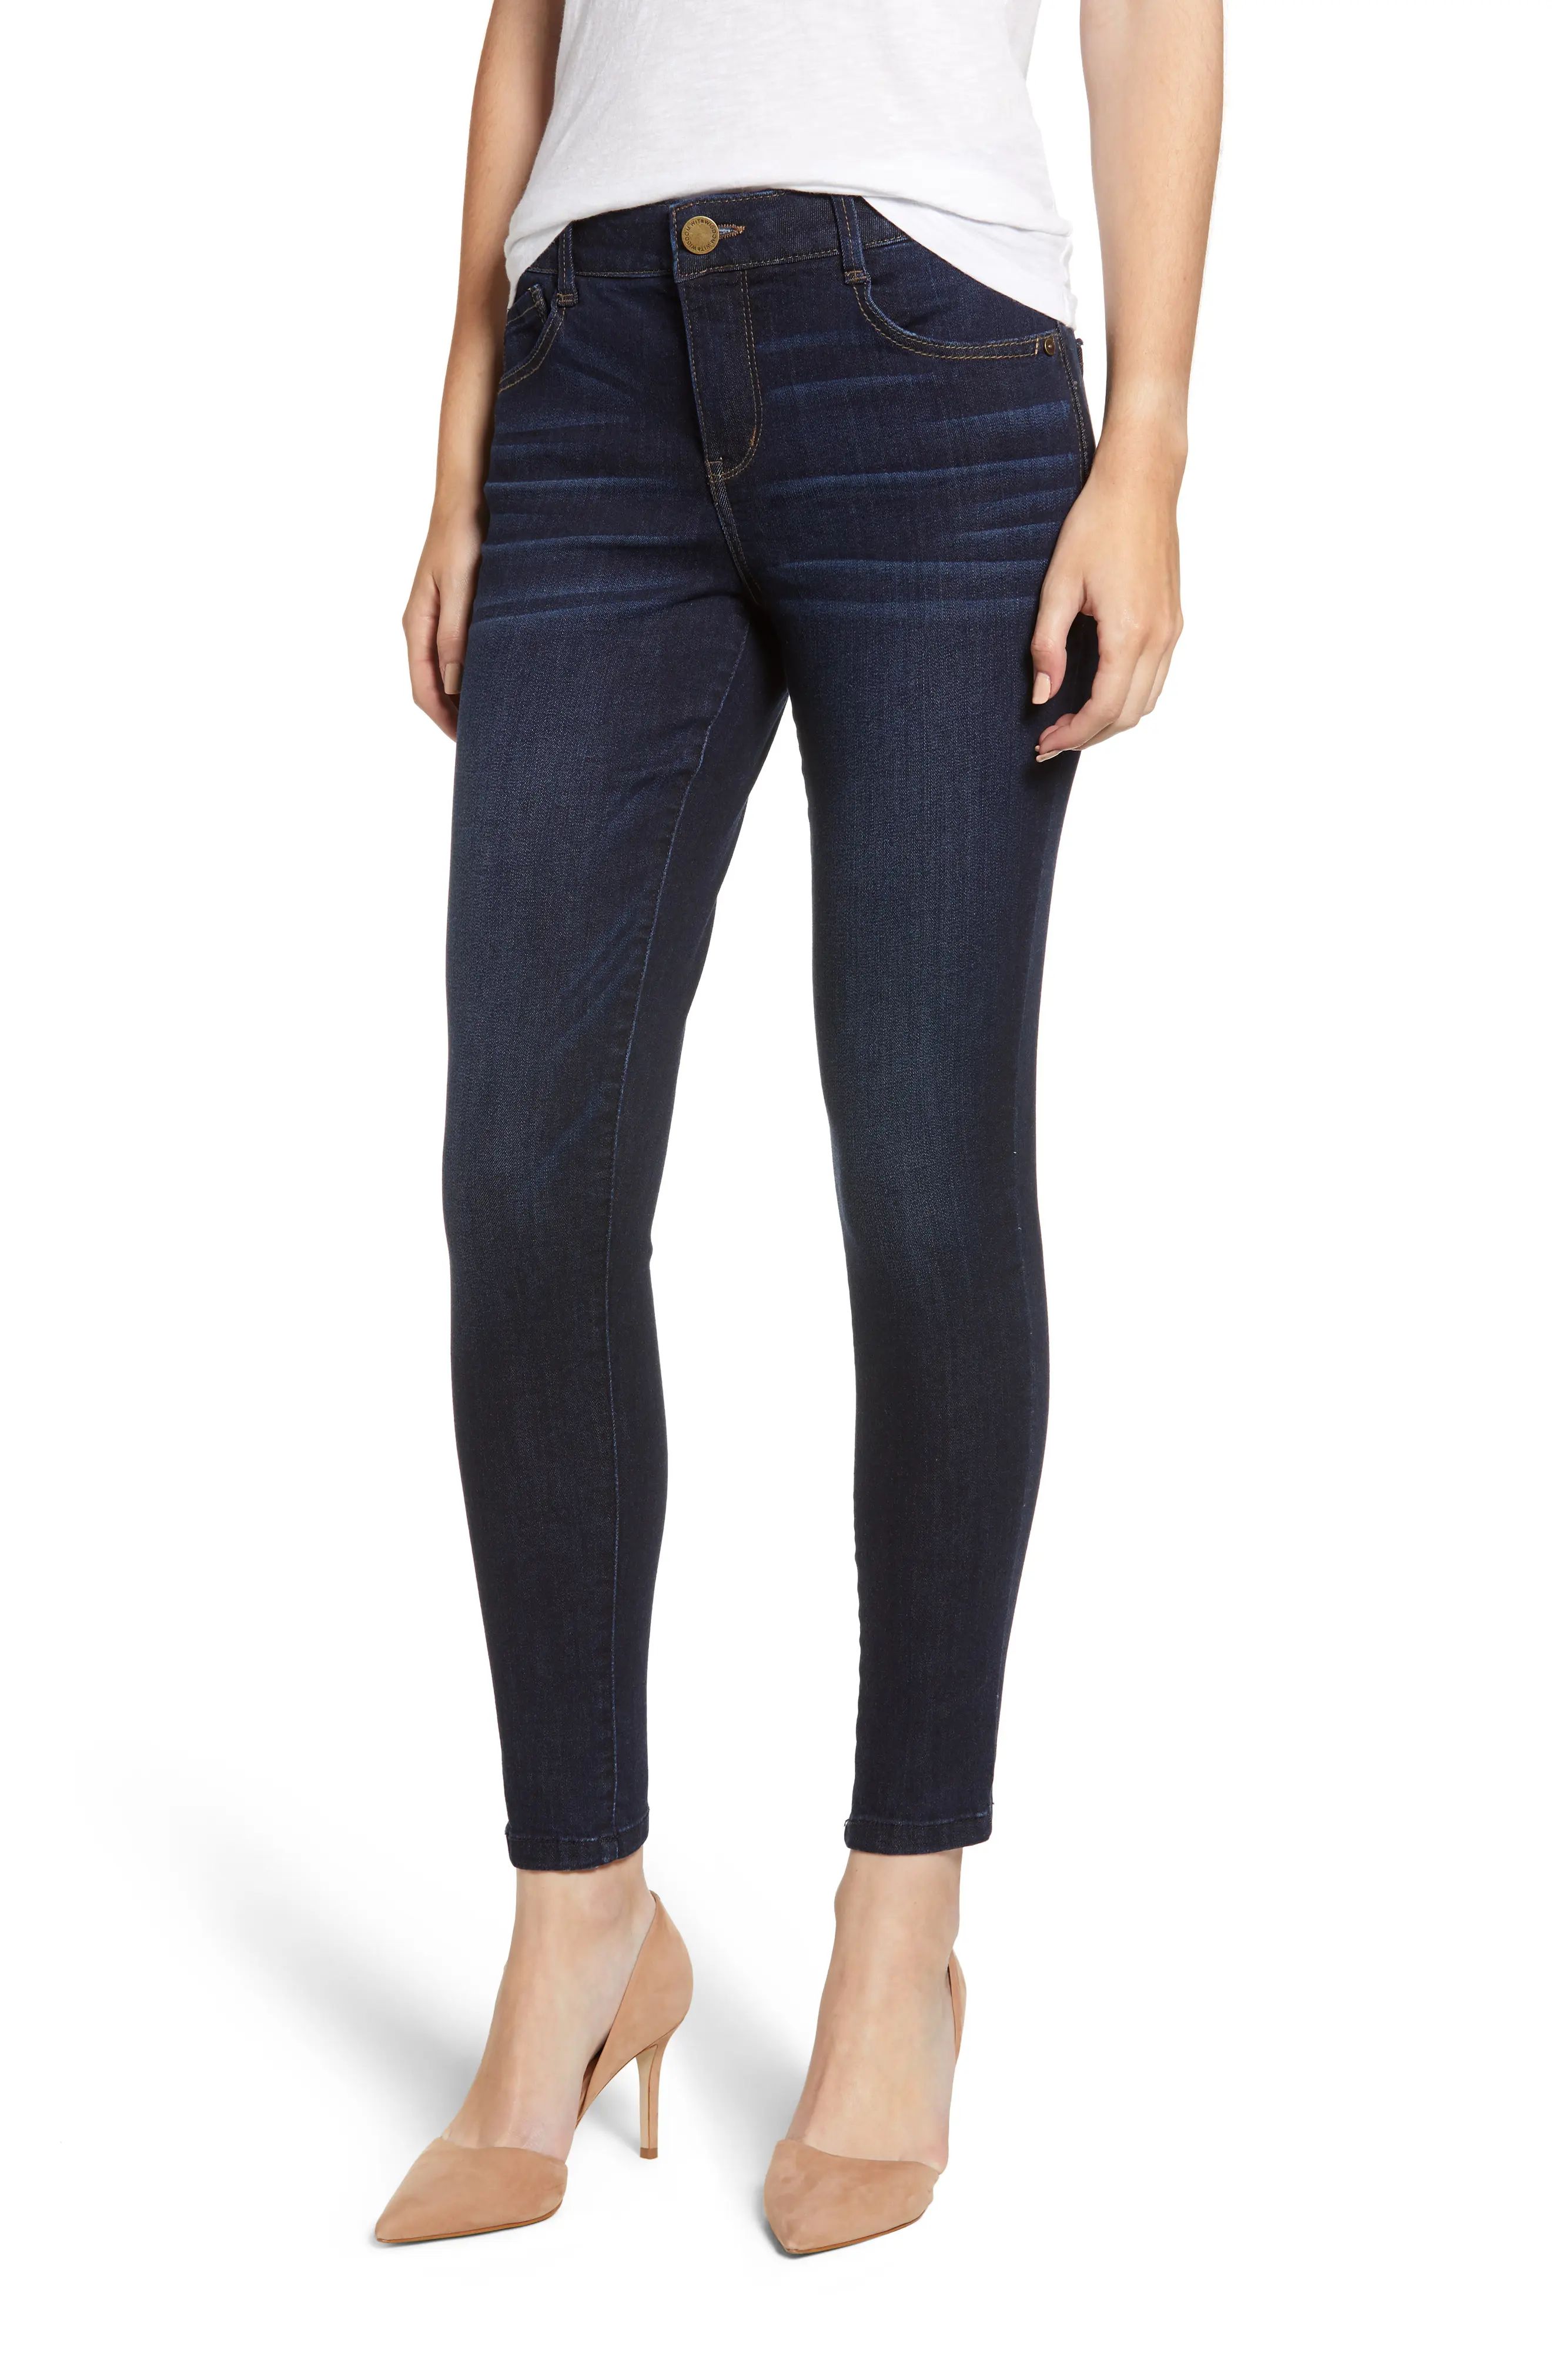 Wit & Wisdom Ab-solution High Waist Modern Skinny Ankle Jeans (Nordstrom Exclusive) | Nordstrom